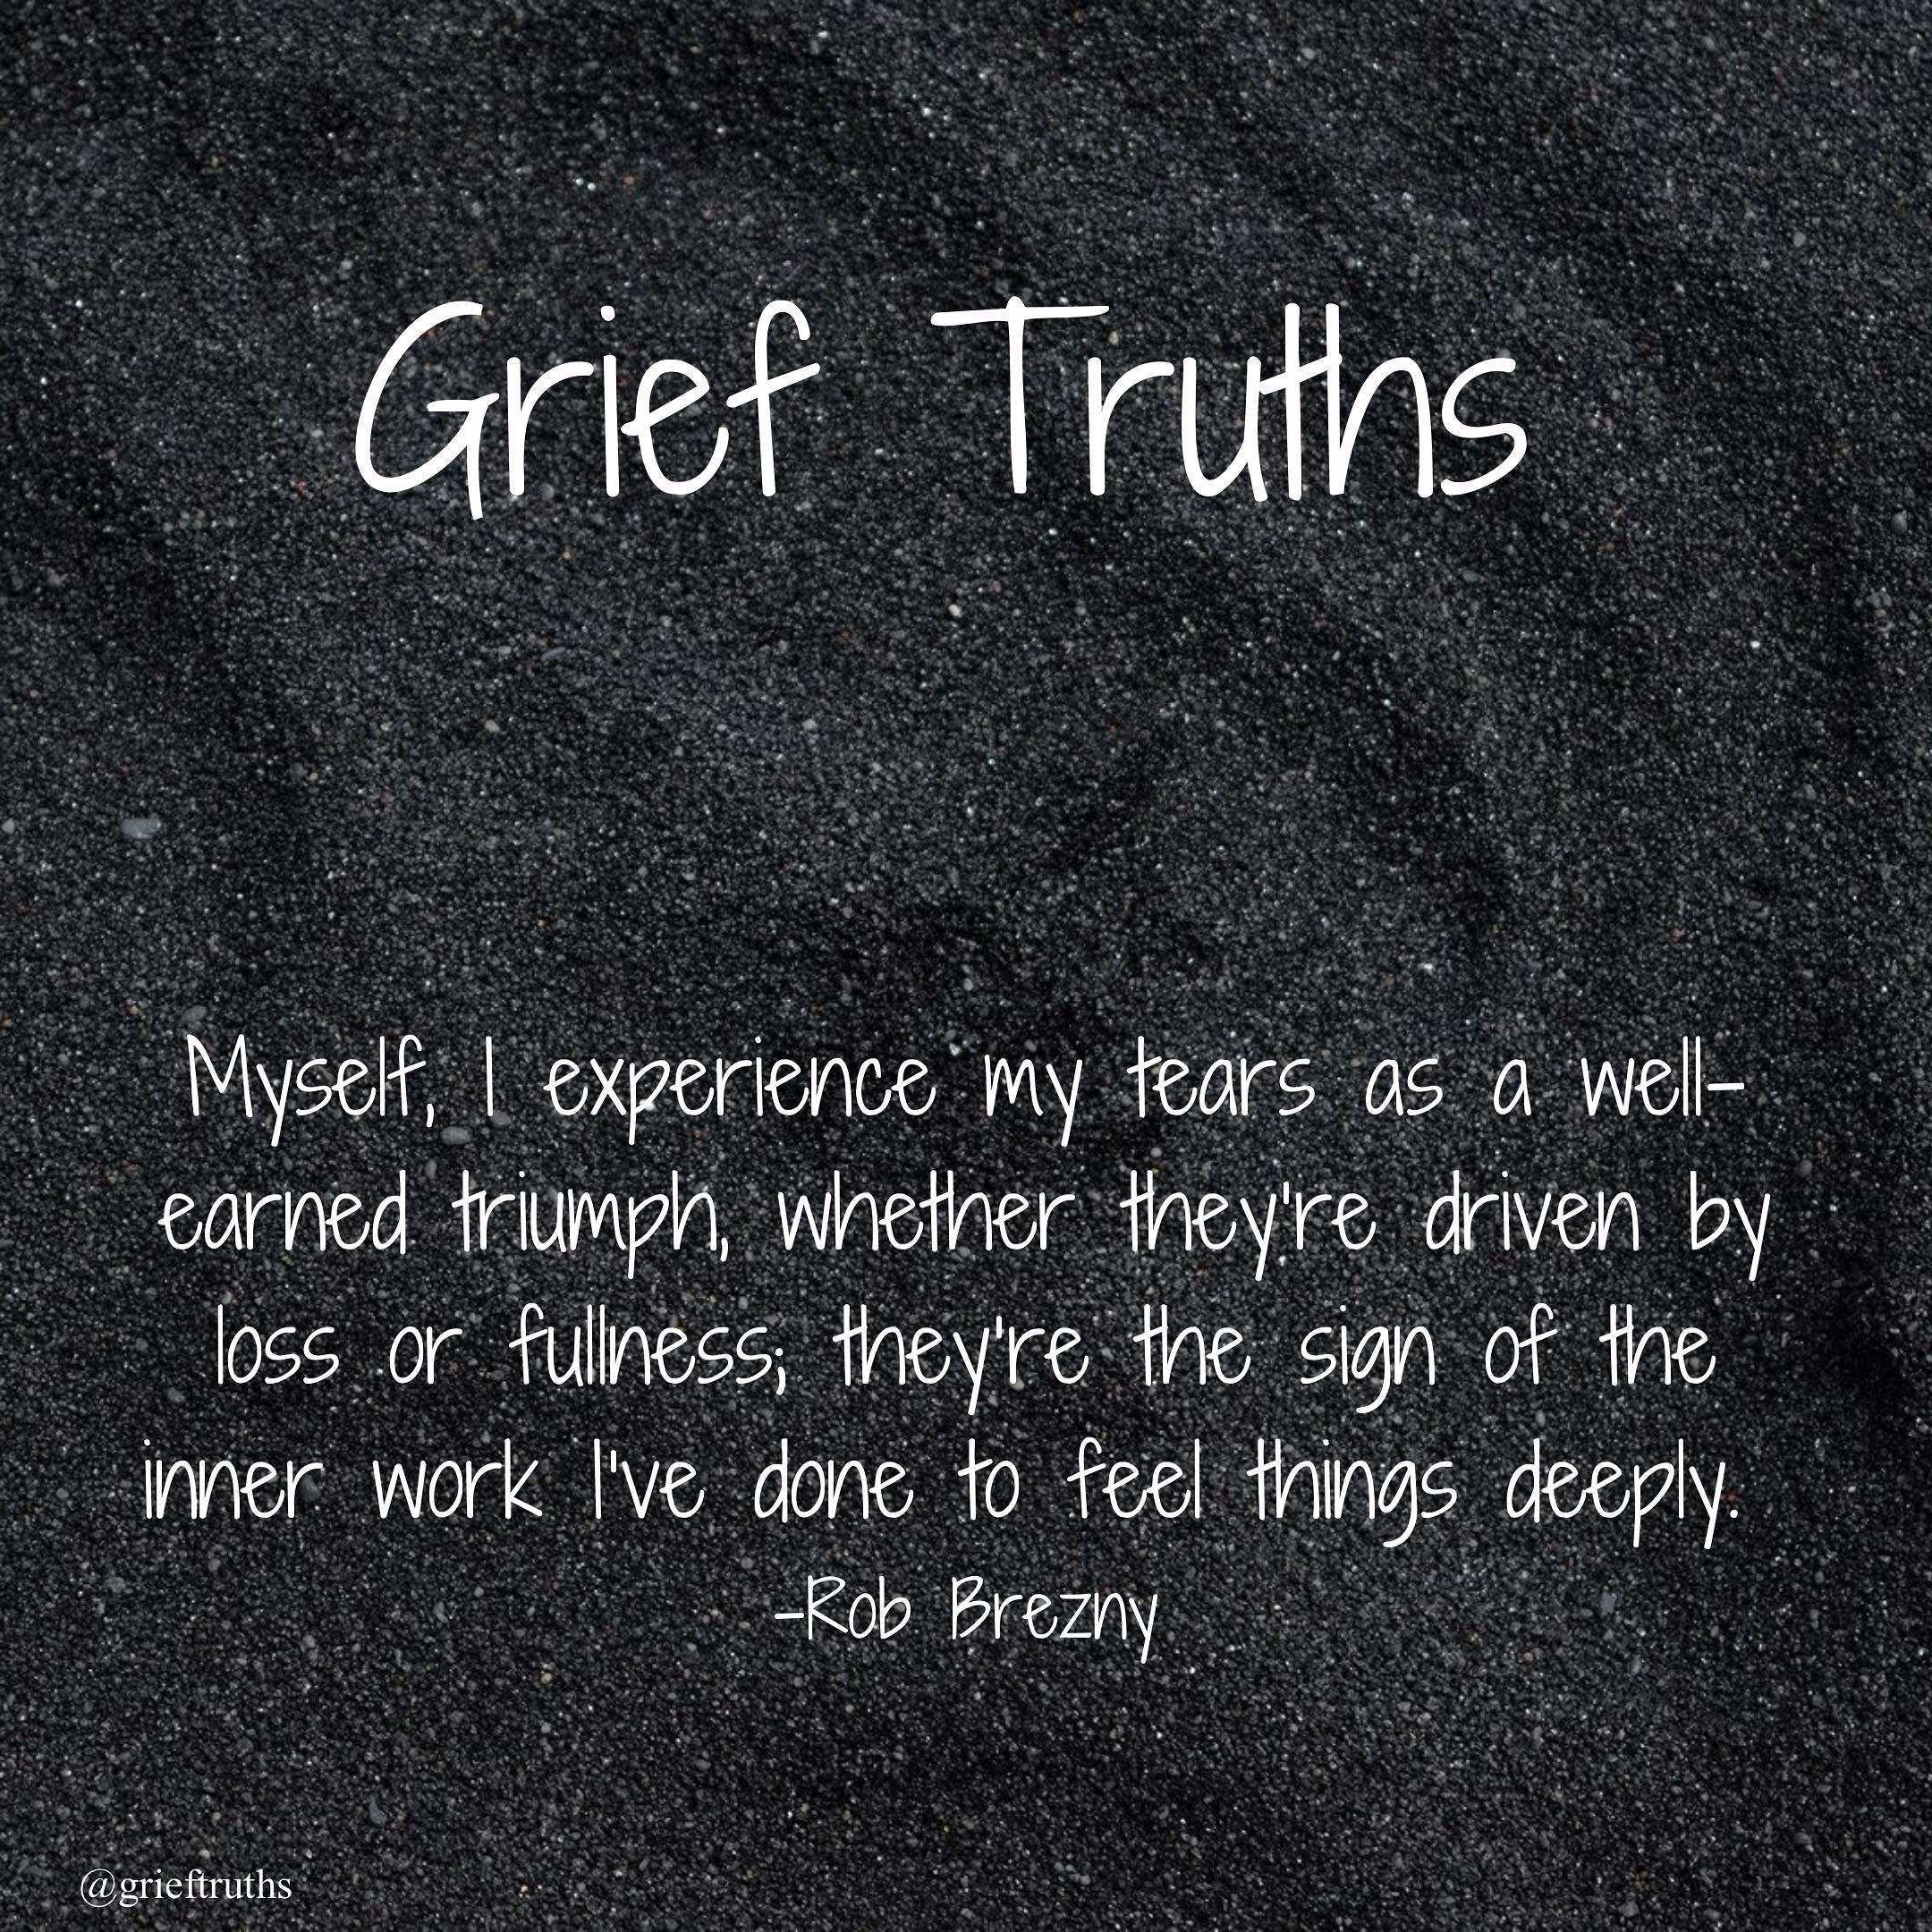 #griefliteracy #griefhealing #memories #sad #therapy #quotes #transformation #normalizegrief #motherlessdaughters #sorrow #resiliency #learningtolivewithgriefyy #grief #loss #griefjourney #love #griefandloss #grieving #healing#mentalhealth #bereaveme